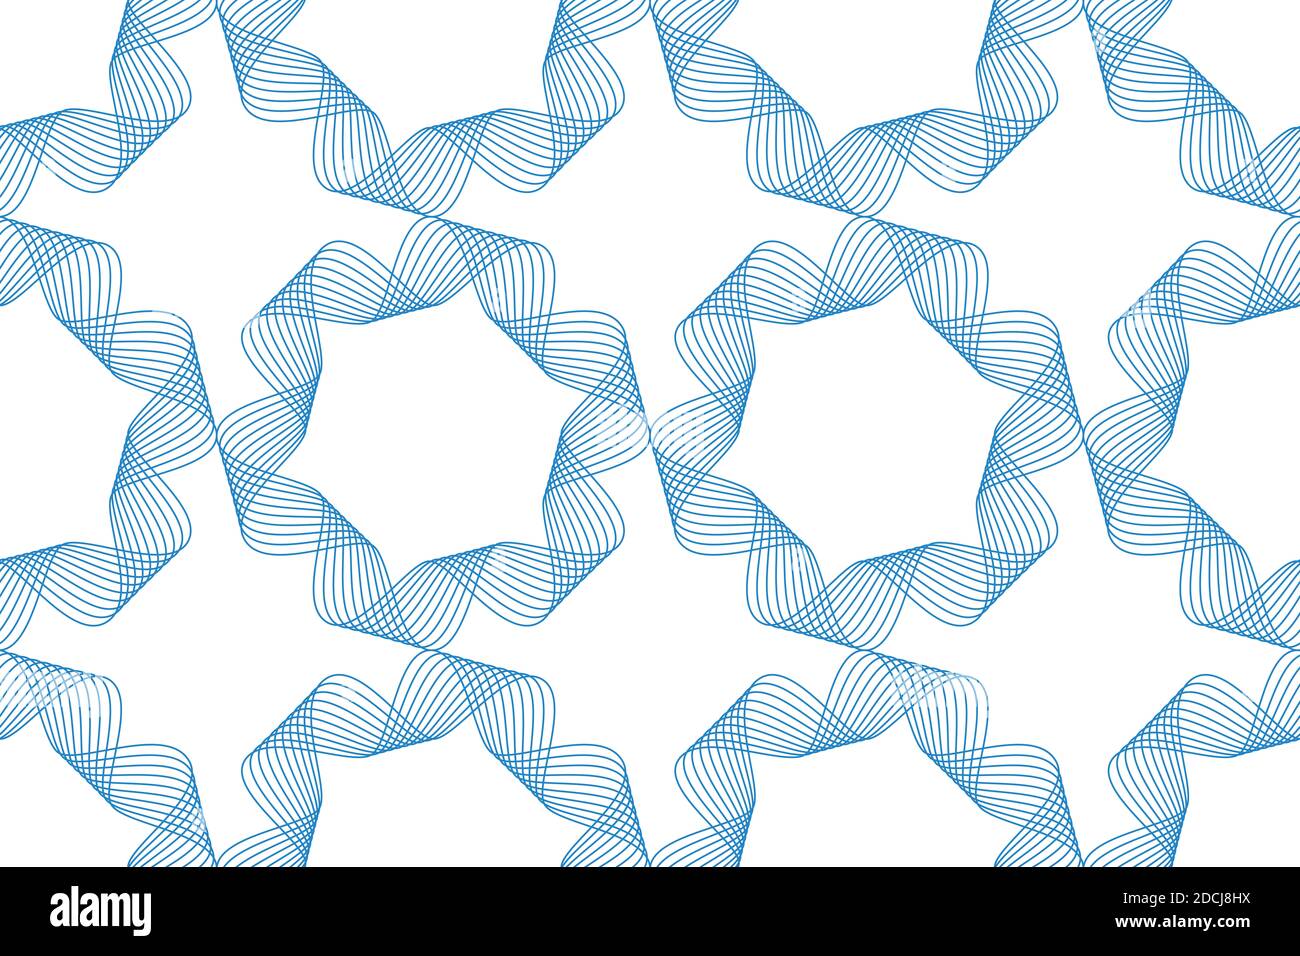 Seamless, abstract background pattern made with repeated curvy lines in flower abstraction. Modern, decorative and simple vector art in blue color. Stock Photo